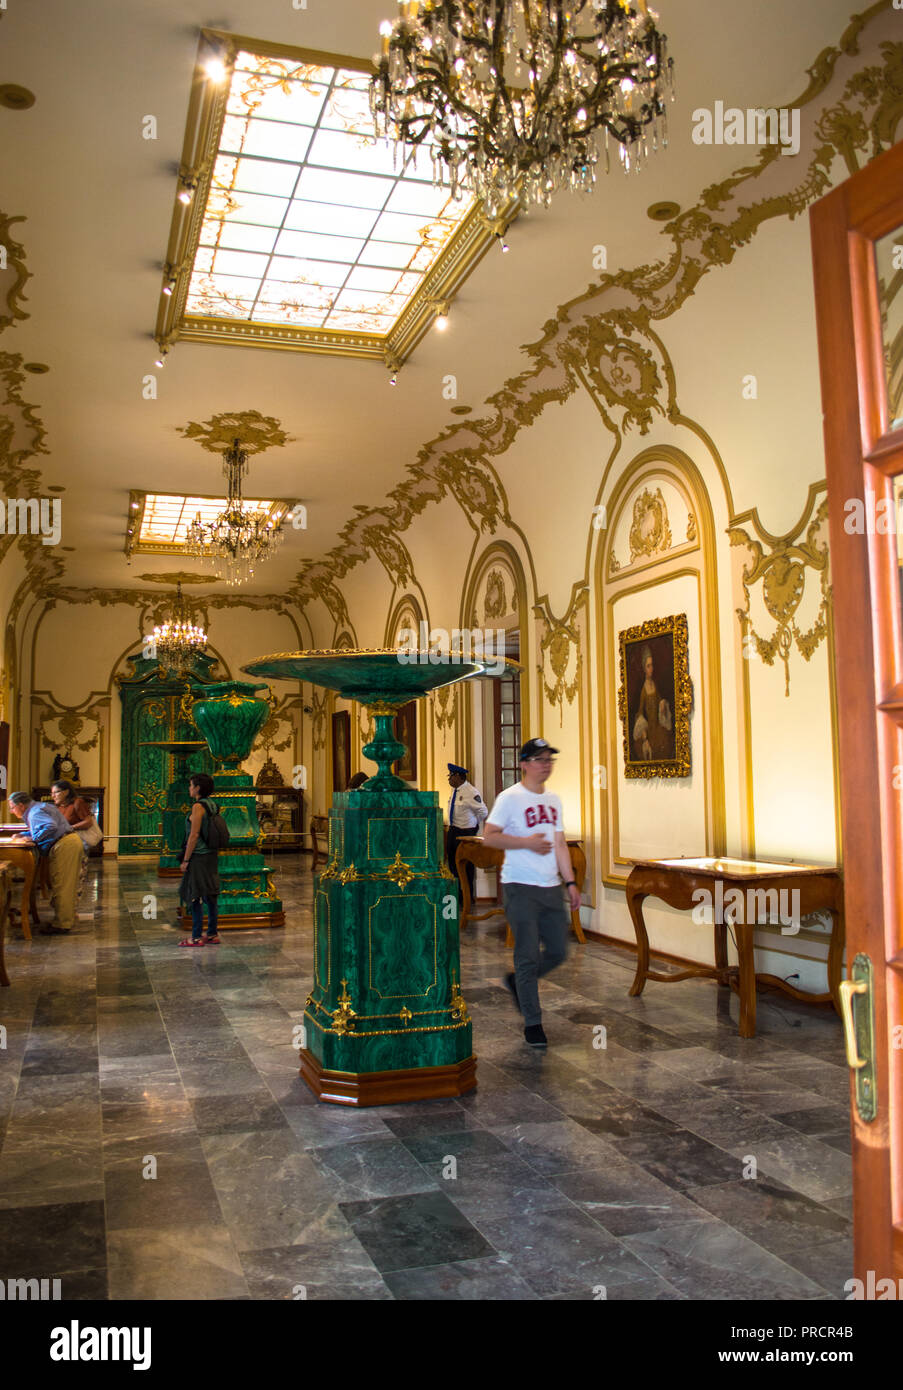 Inside of the National History museum, Chapultepec castle, Mexico City, Stock Photo